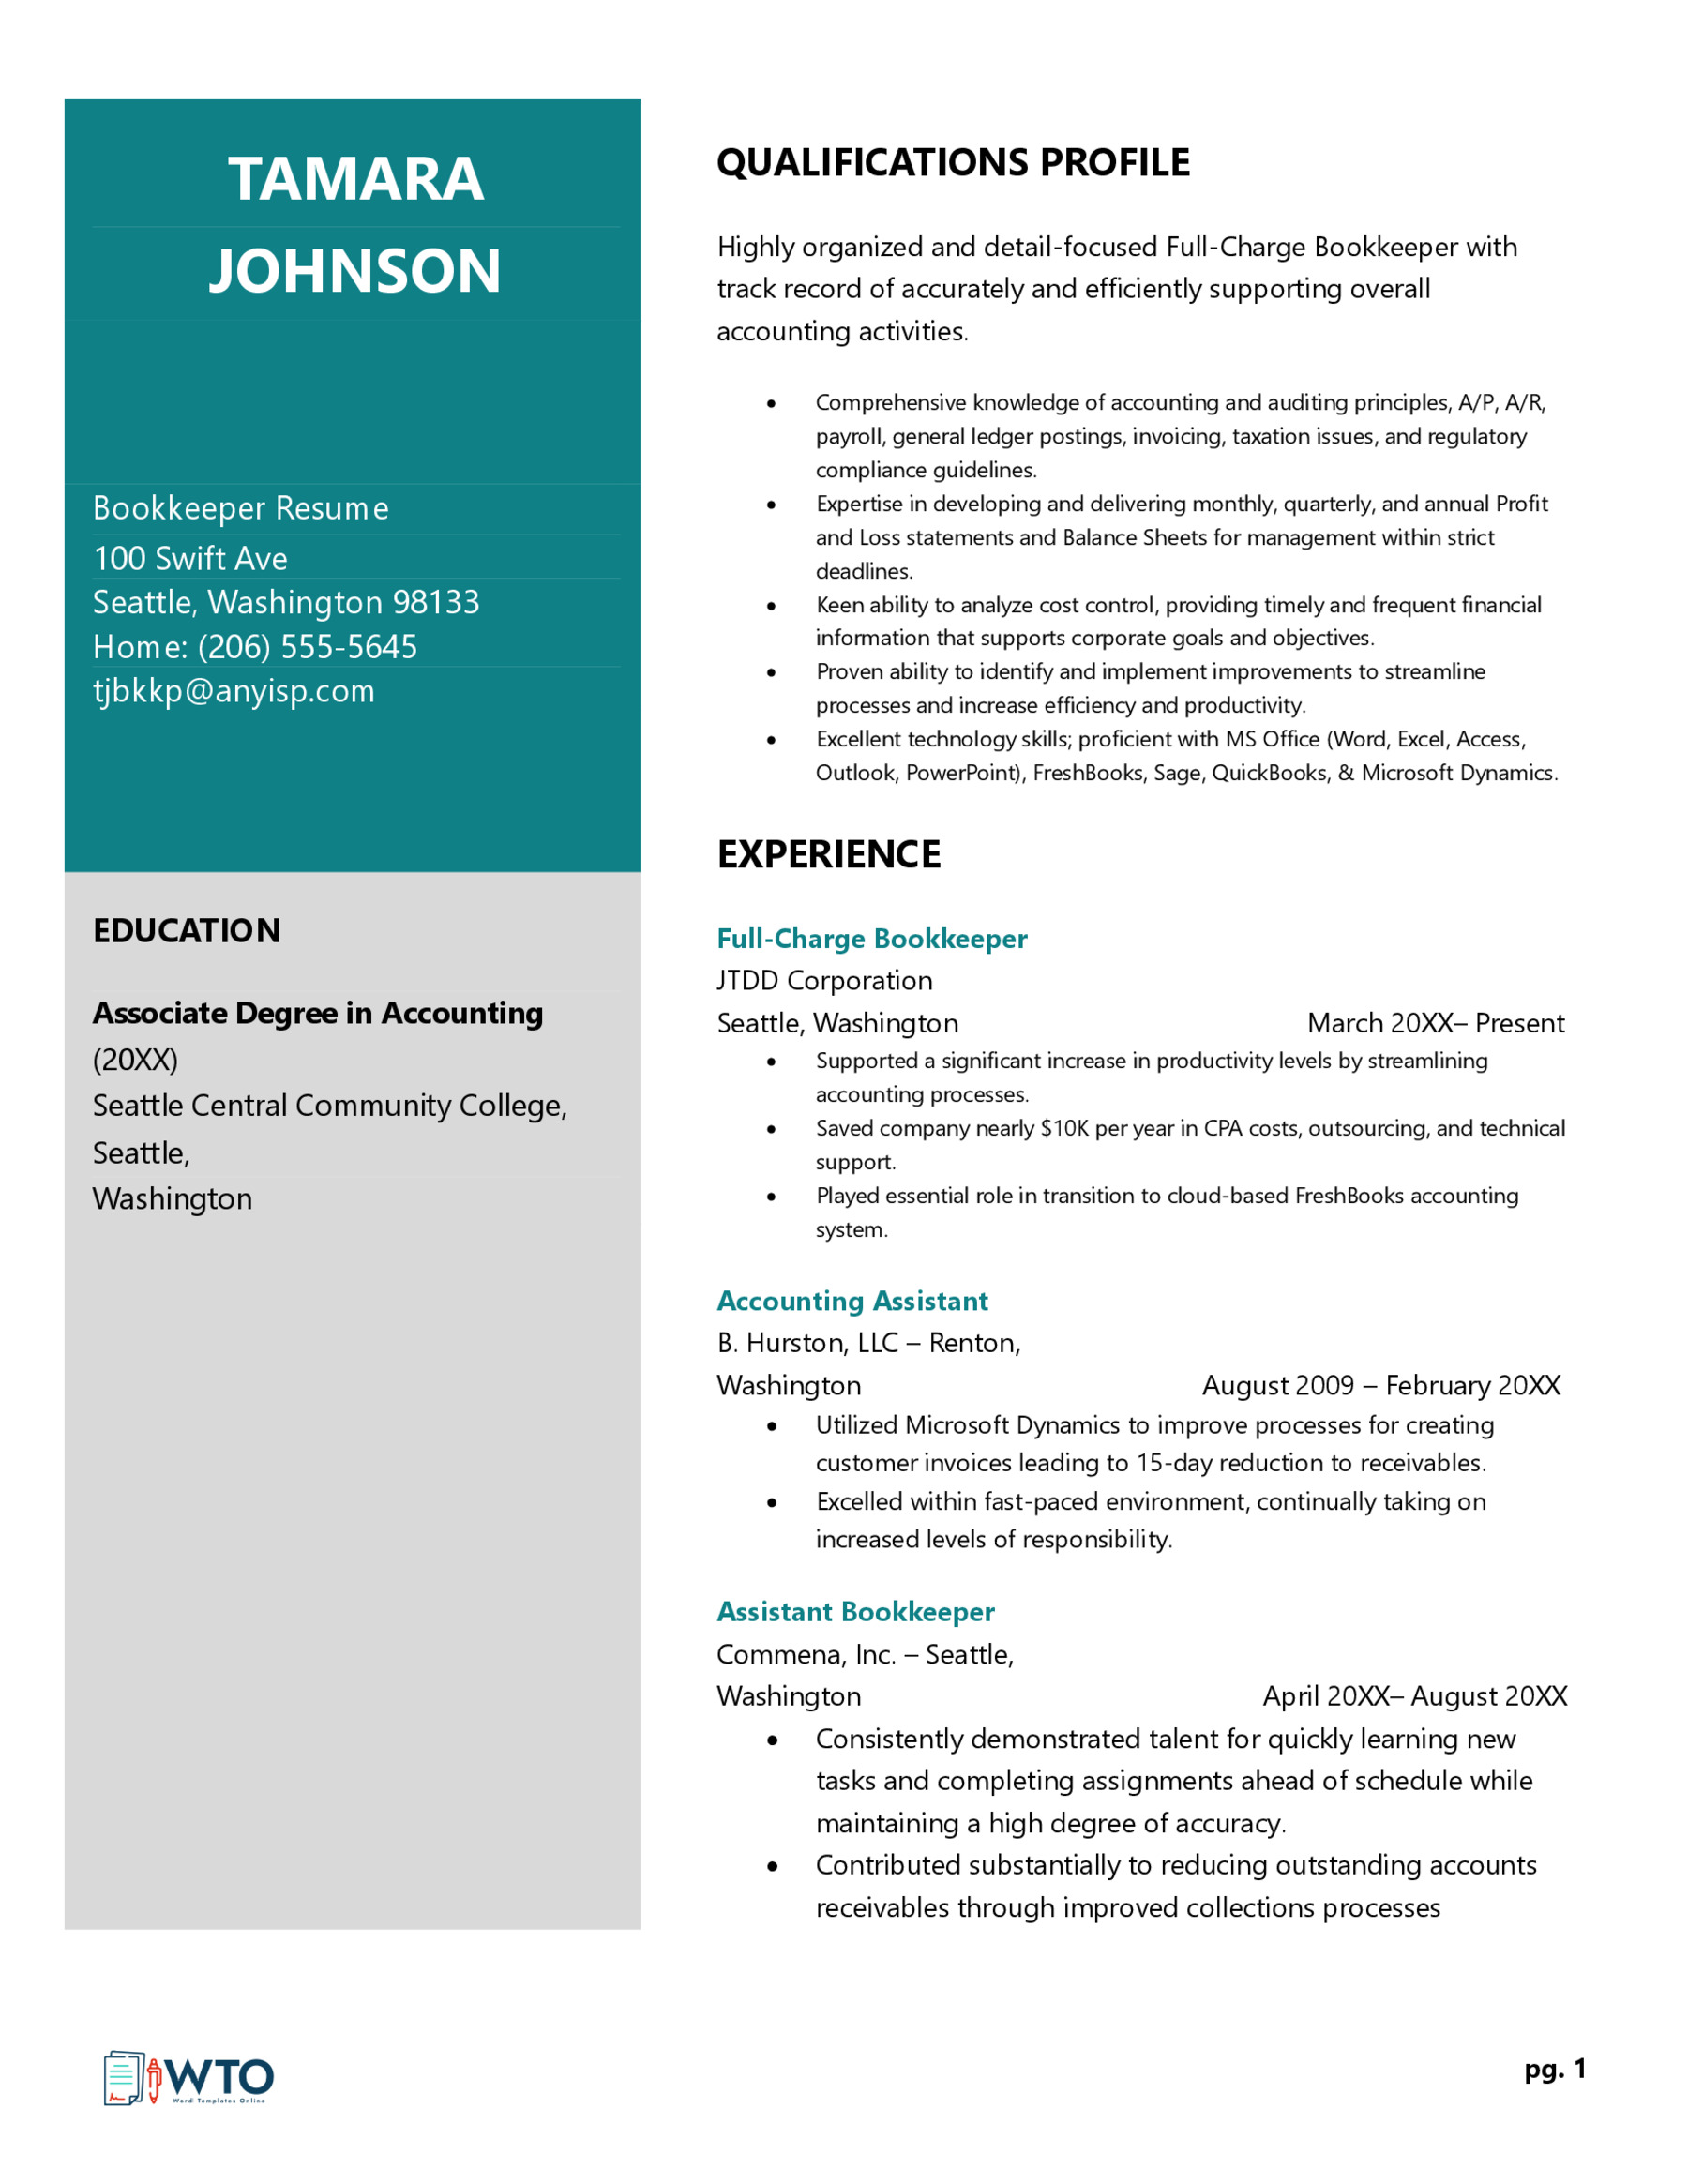 Free Bookkeeper Resume Template - Editable Format